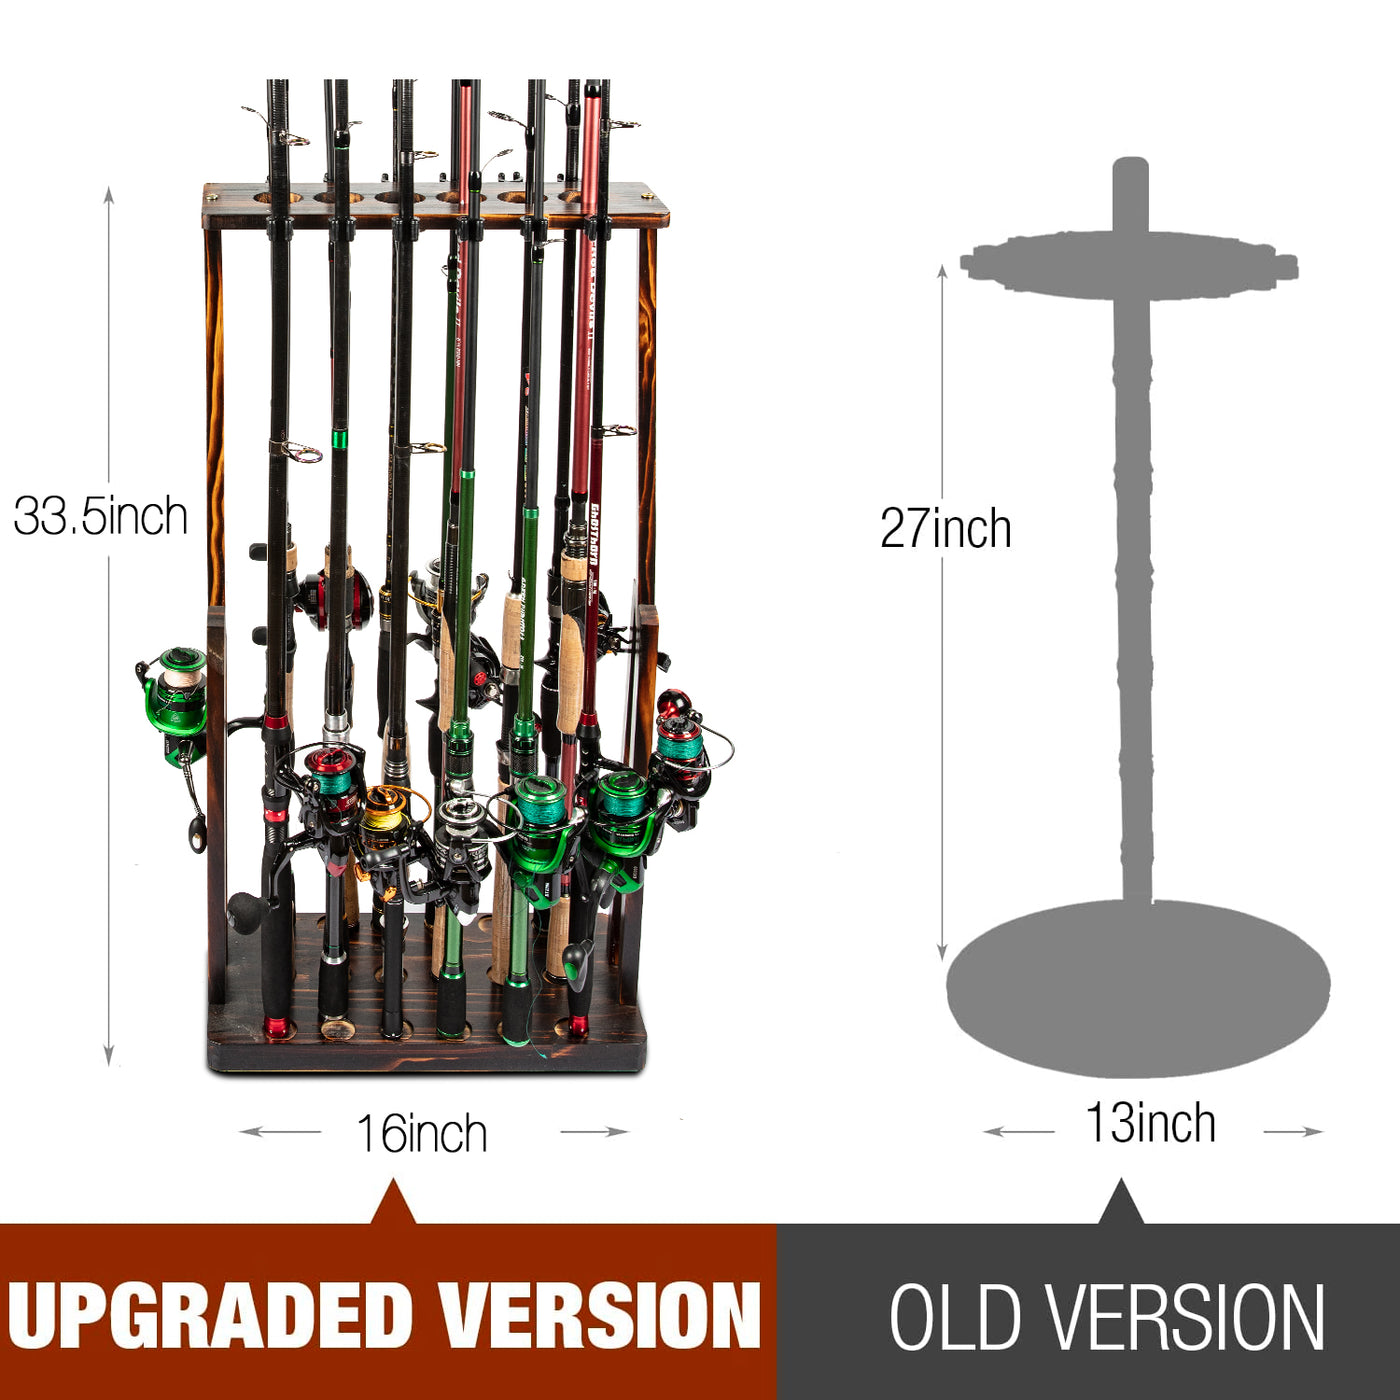 Fishing Rod Pole Holders Rack Garage Floor Stand Holds up to 18 Rods Wood Vertical Upright Fishing Gear Rod Storage, Fishing Gifts for Men Christmas - Ghosthorn